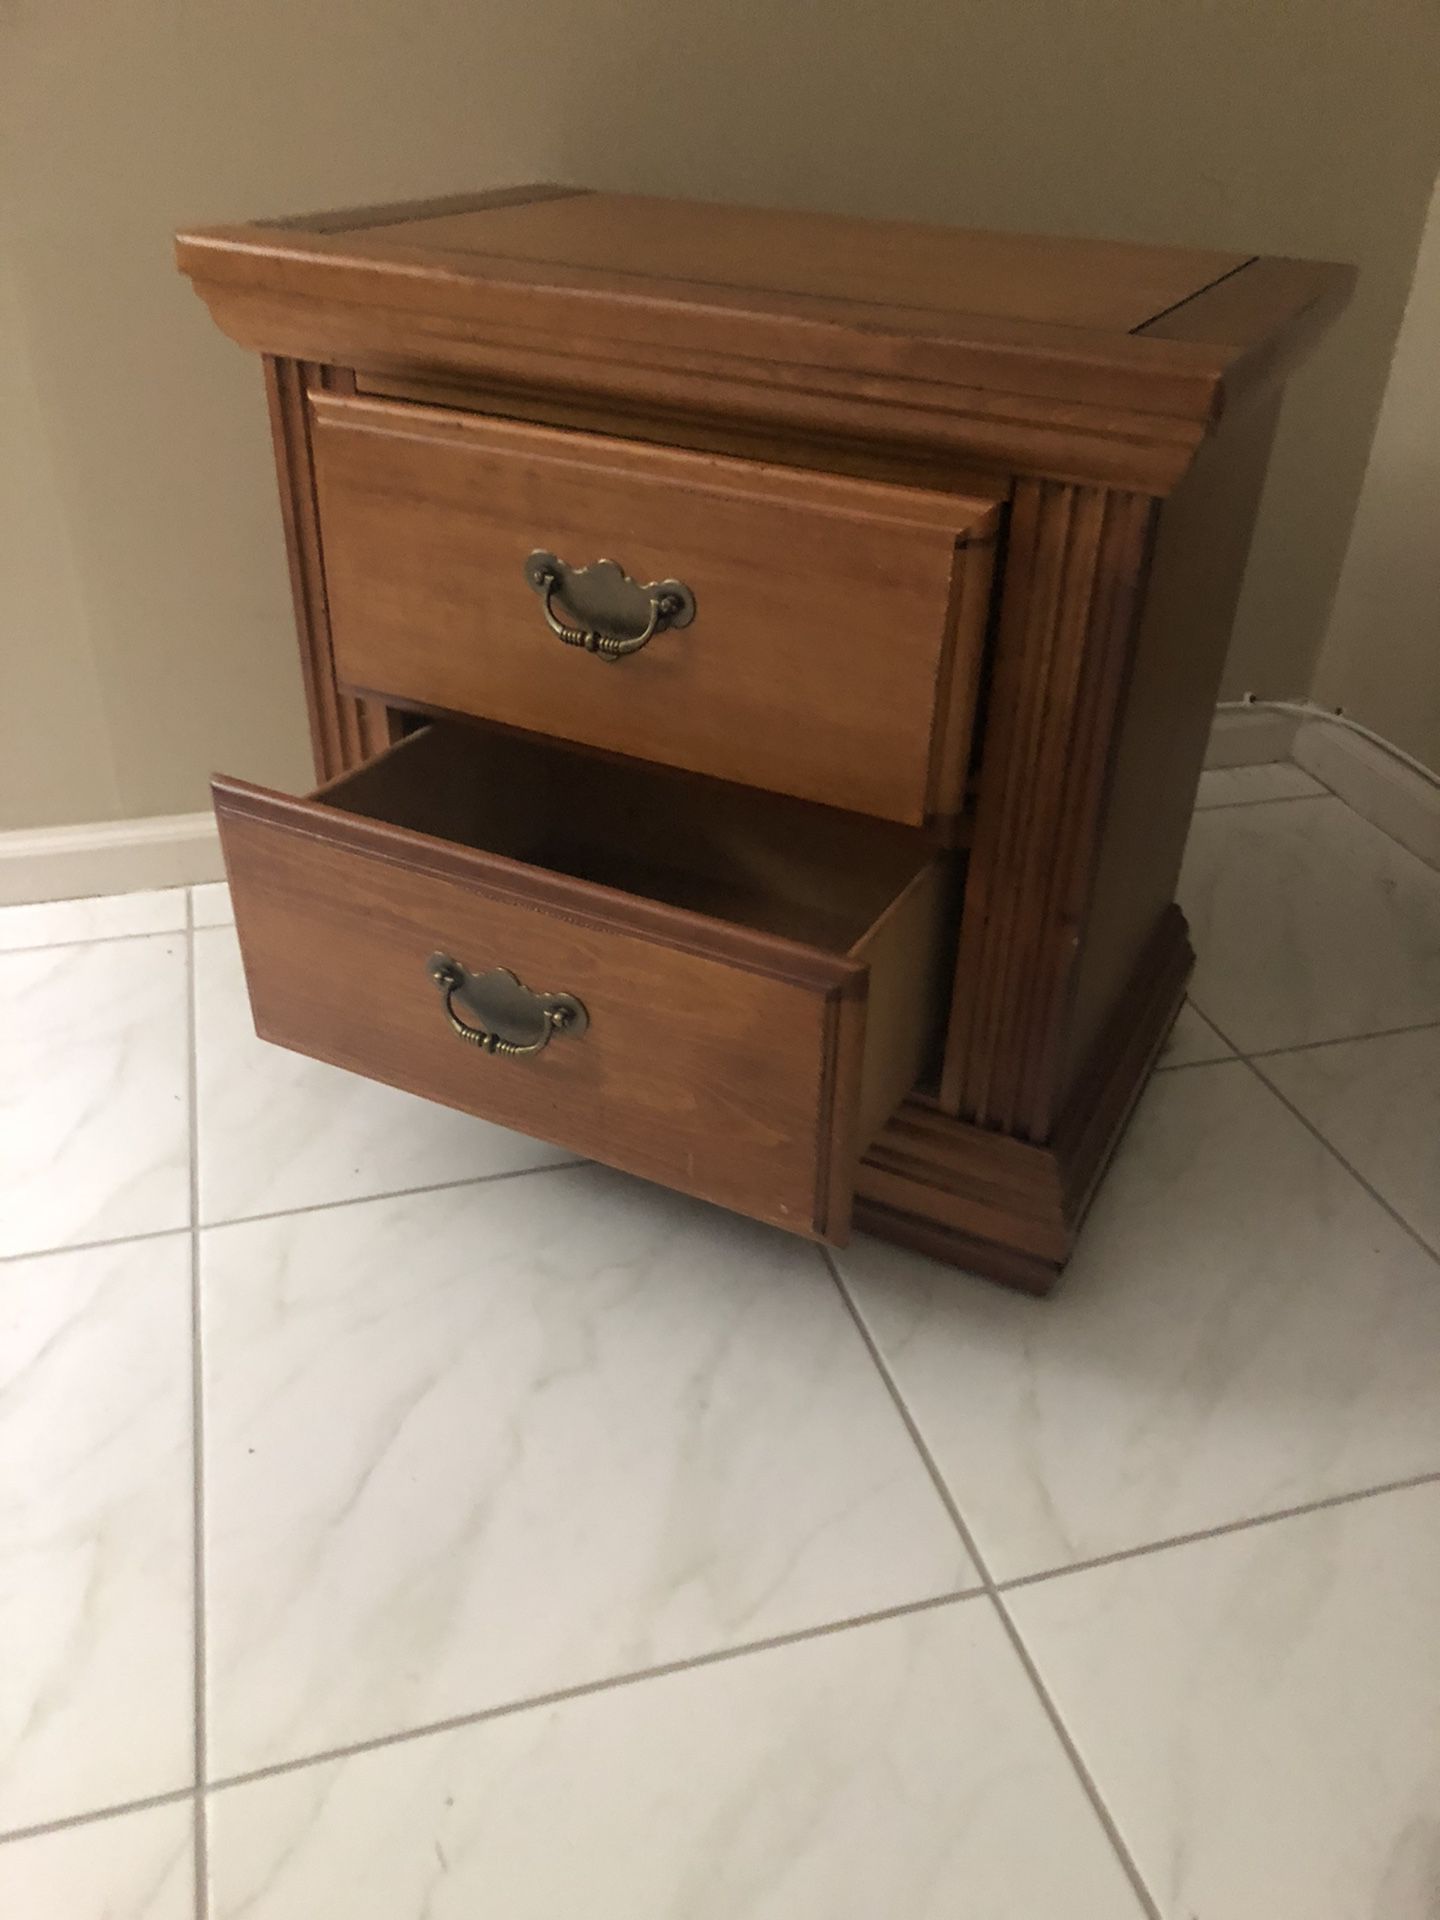 Wooden maple nightstand/end table.